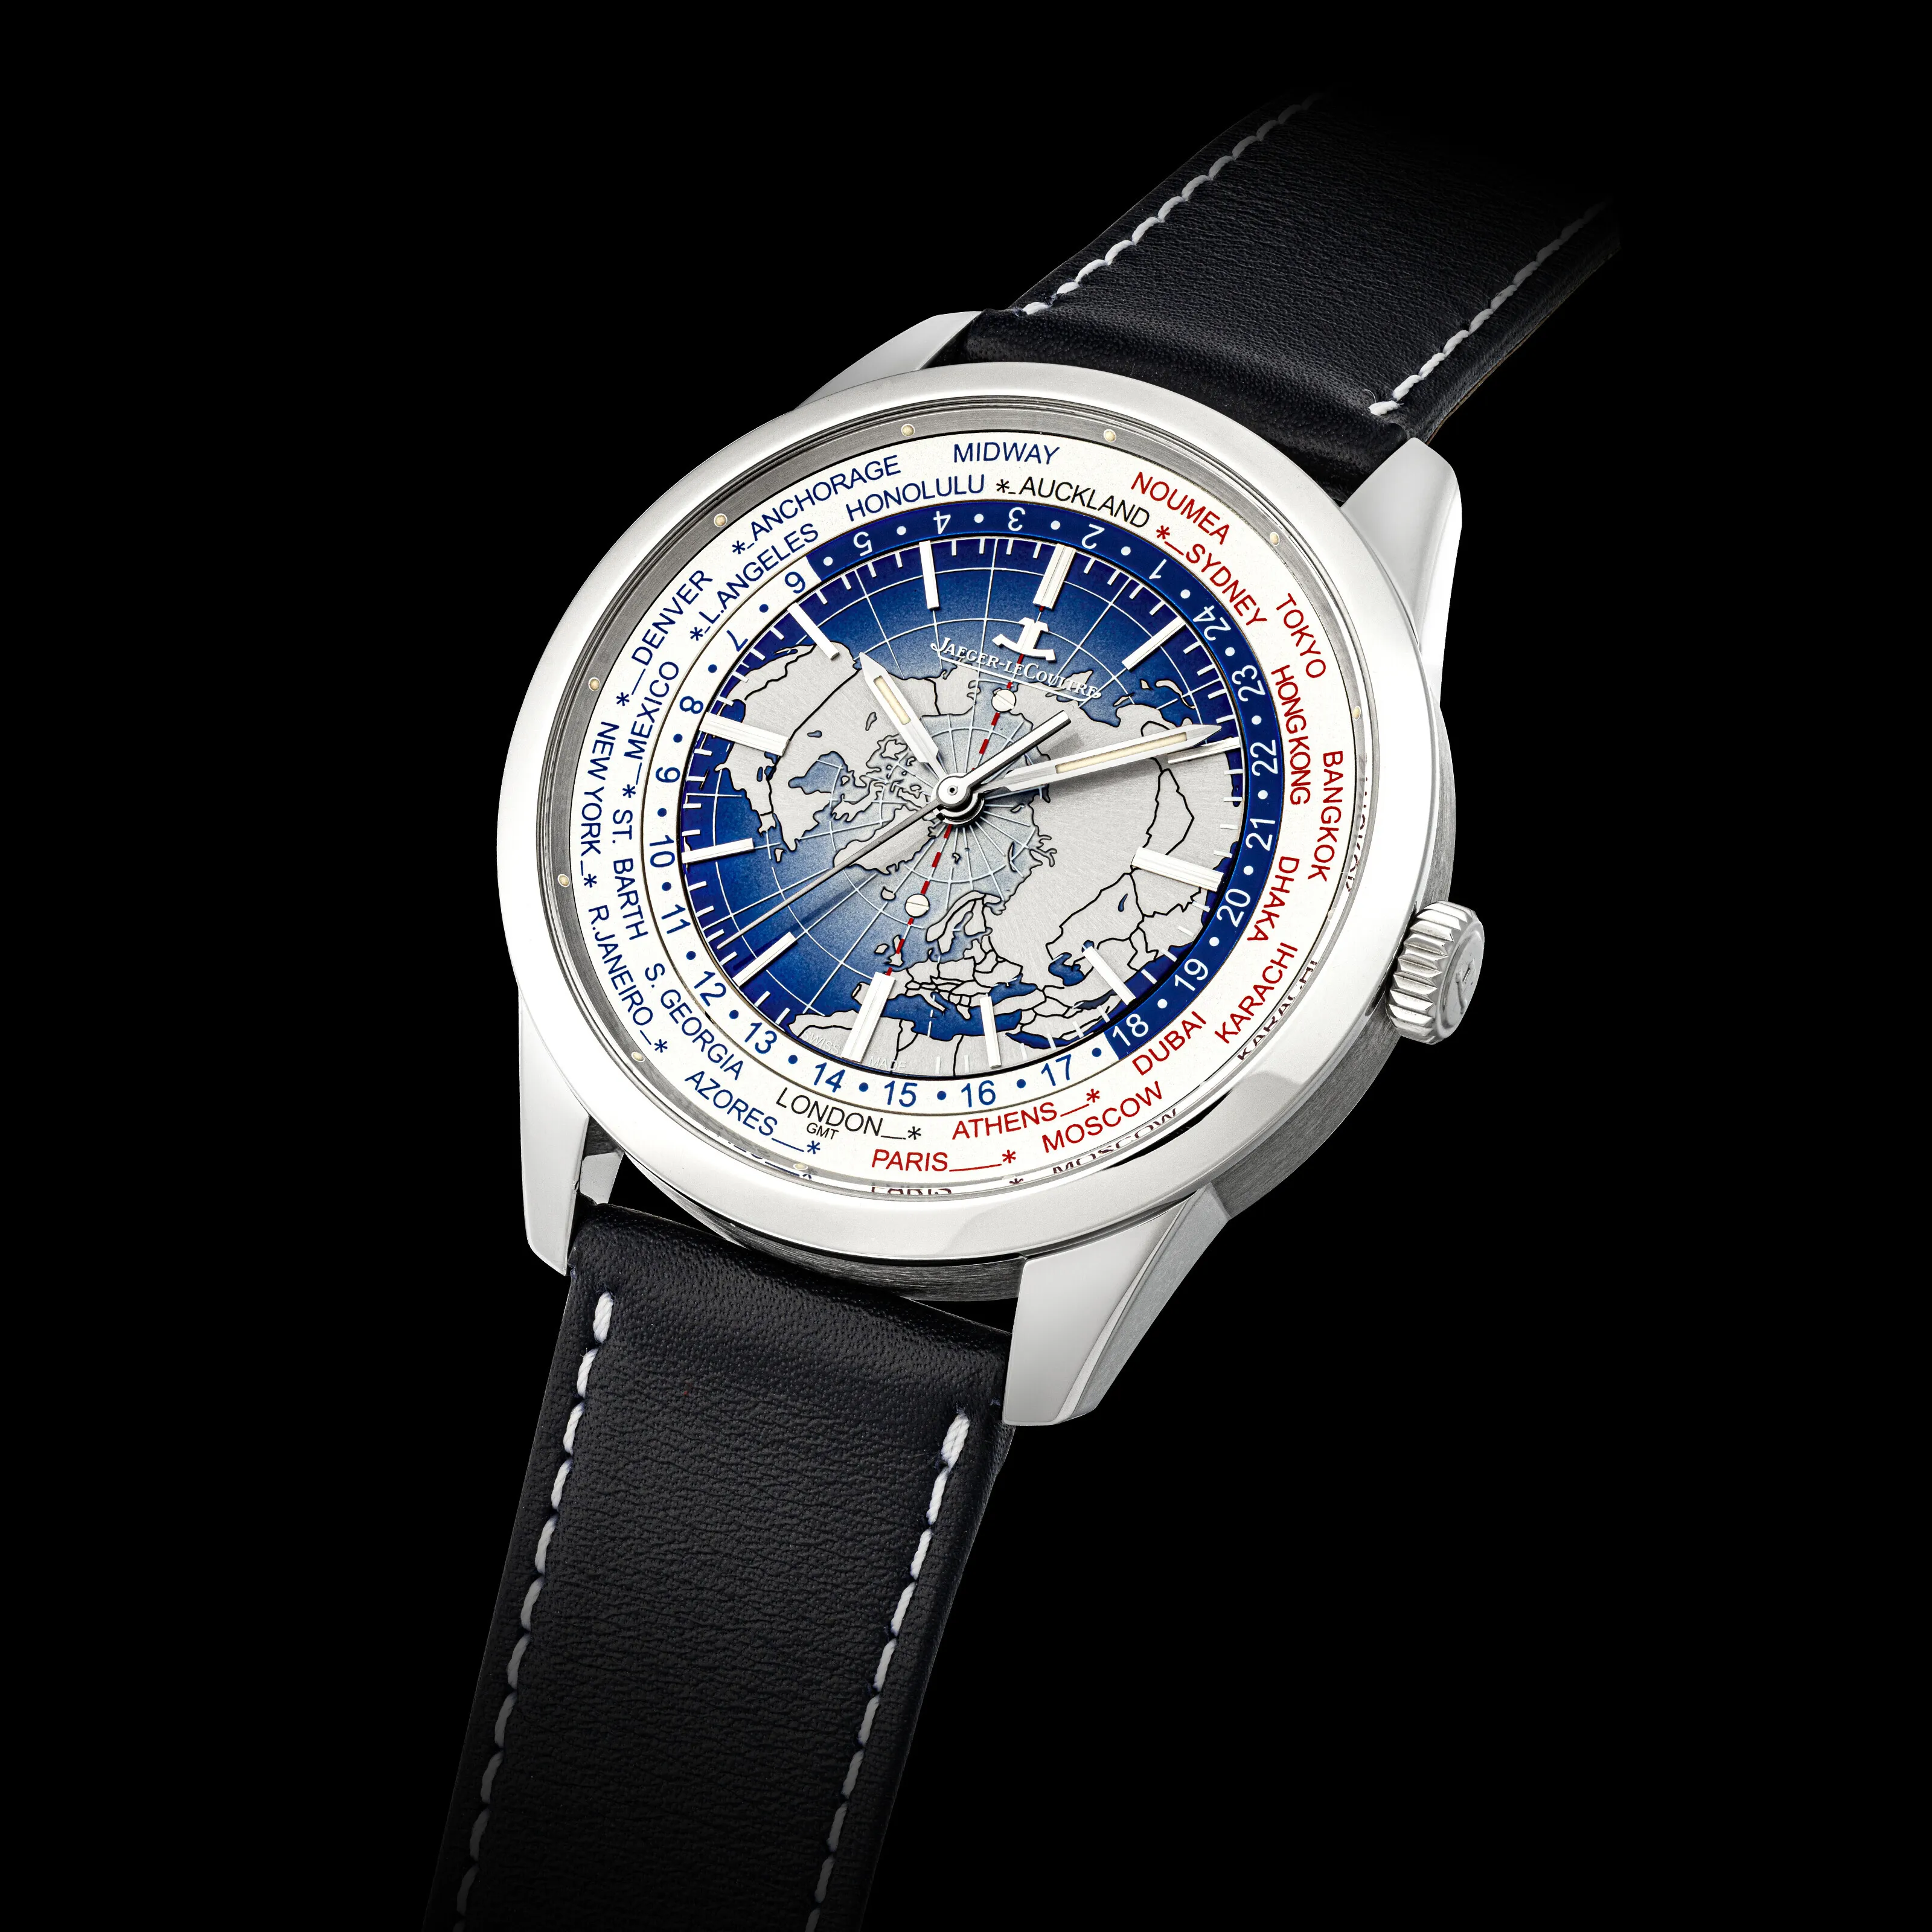 Jaeger-LeCoultre Geophysic Universal Time 503.8.T2.S 42mm Stainless steel Blue